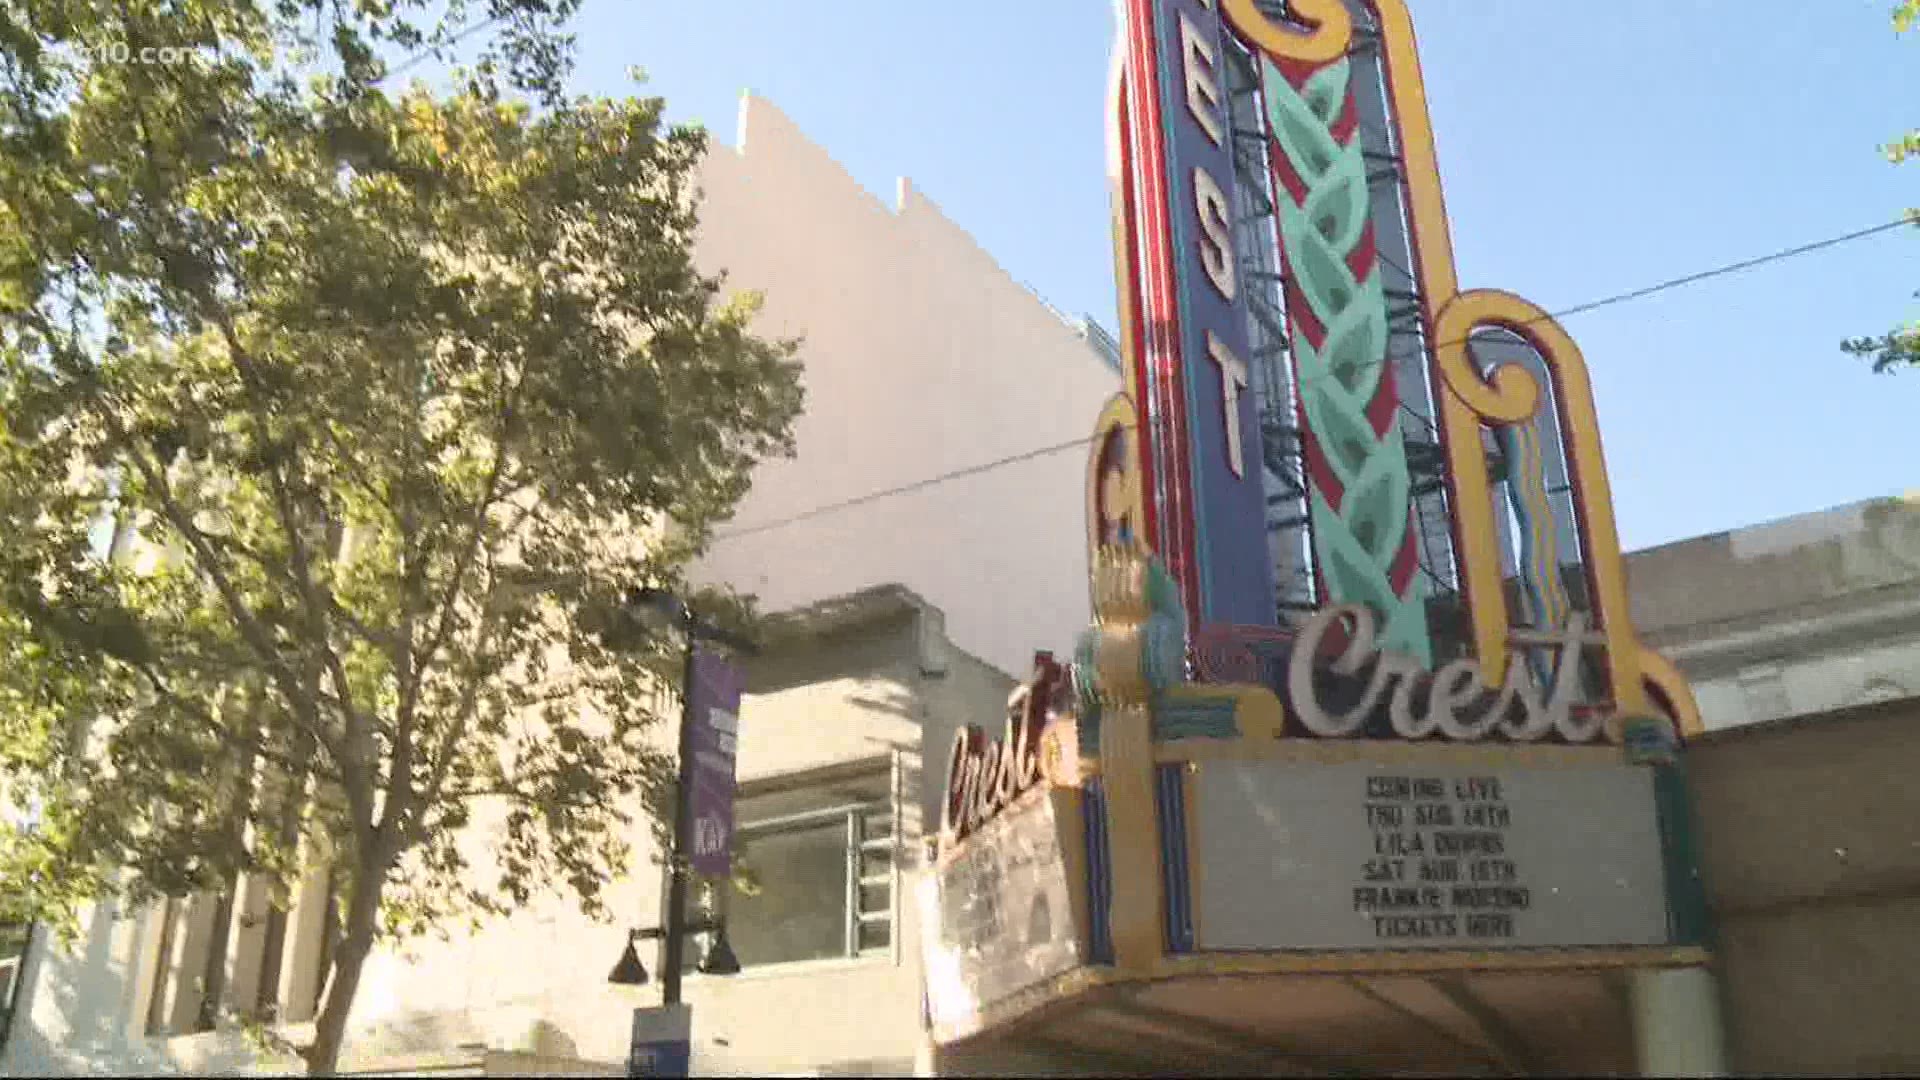 The historic Crest Theatre in Sacramento is getting ready to reopen on Friday, June 19. The theatre will have reduced seating to follow coronavirus safety guidelines